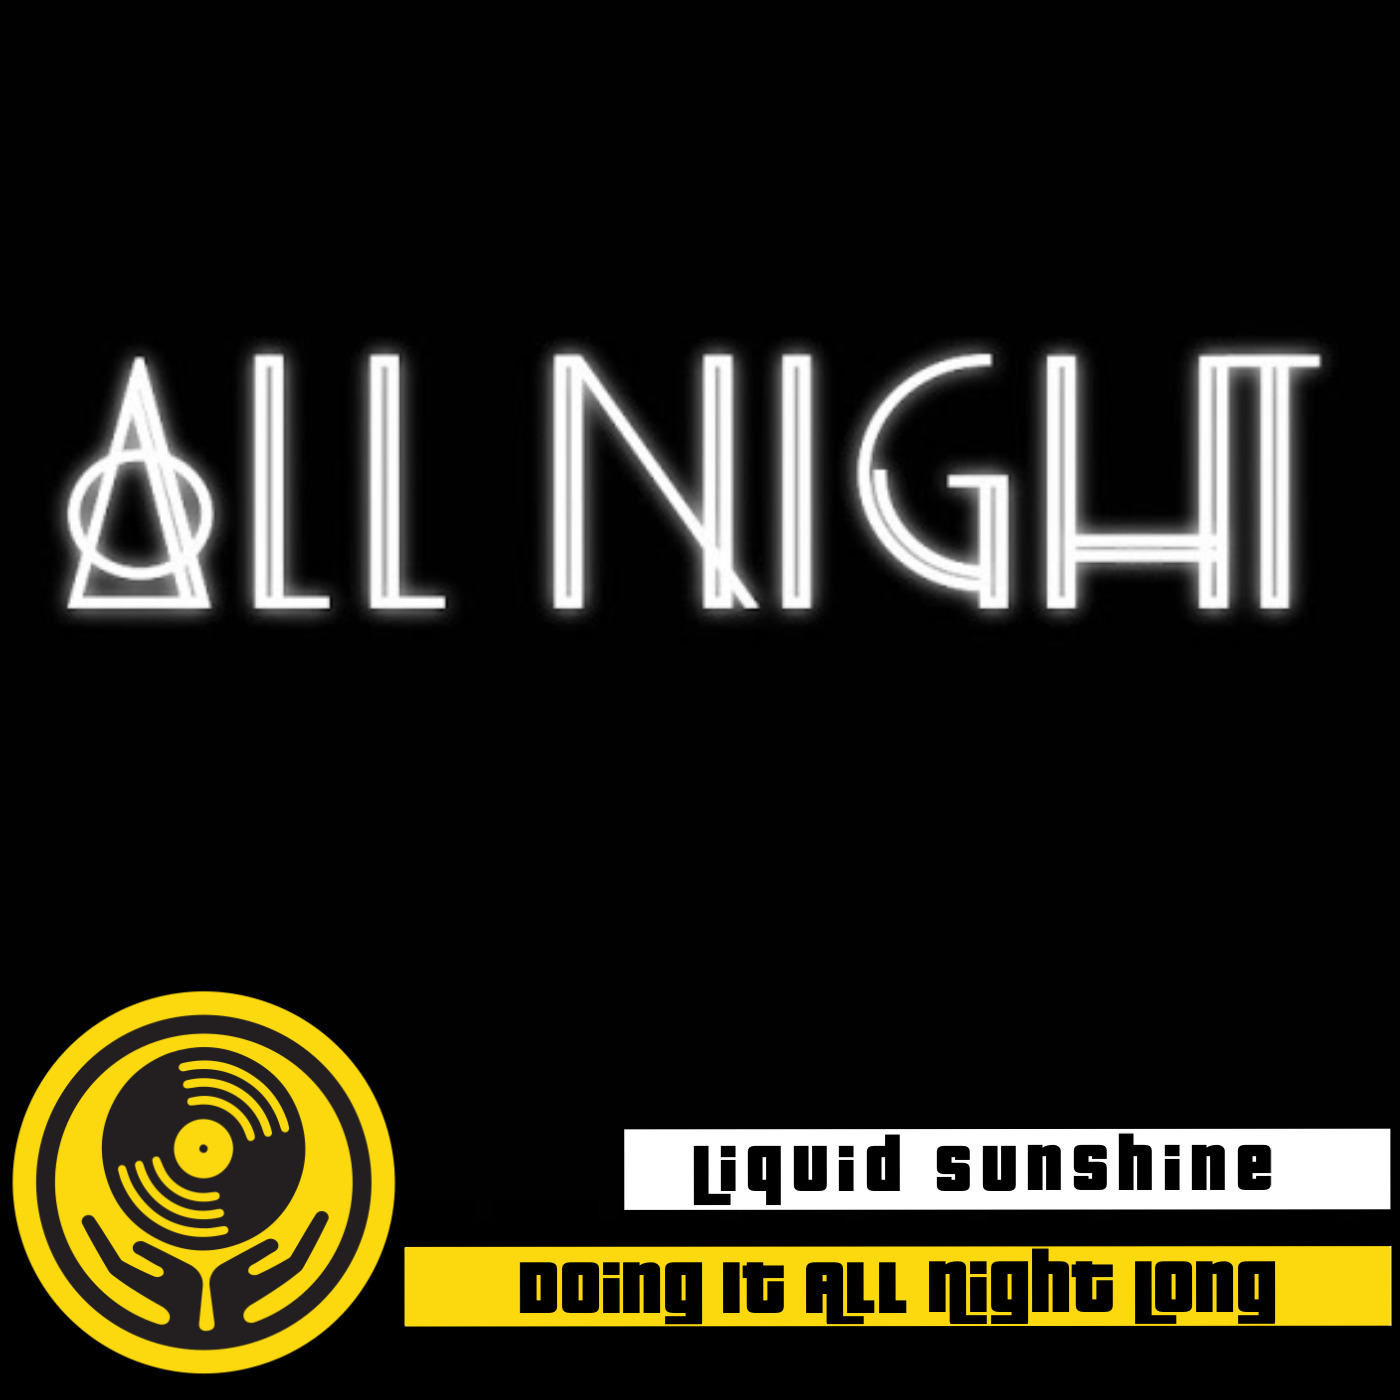 Show #134 - All Night Lovers - A Valentine Day Special - 10-02-2021